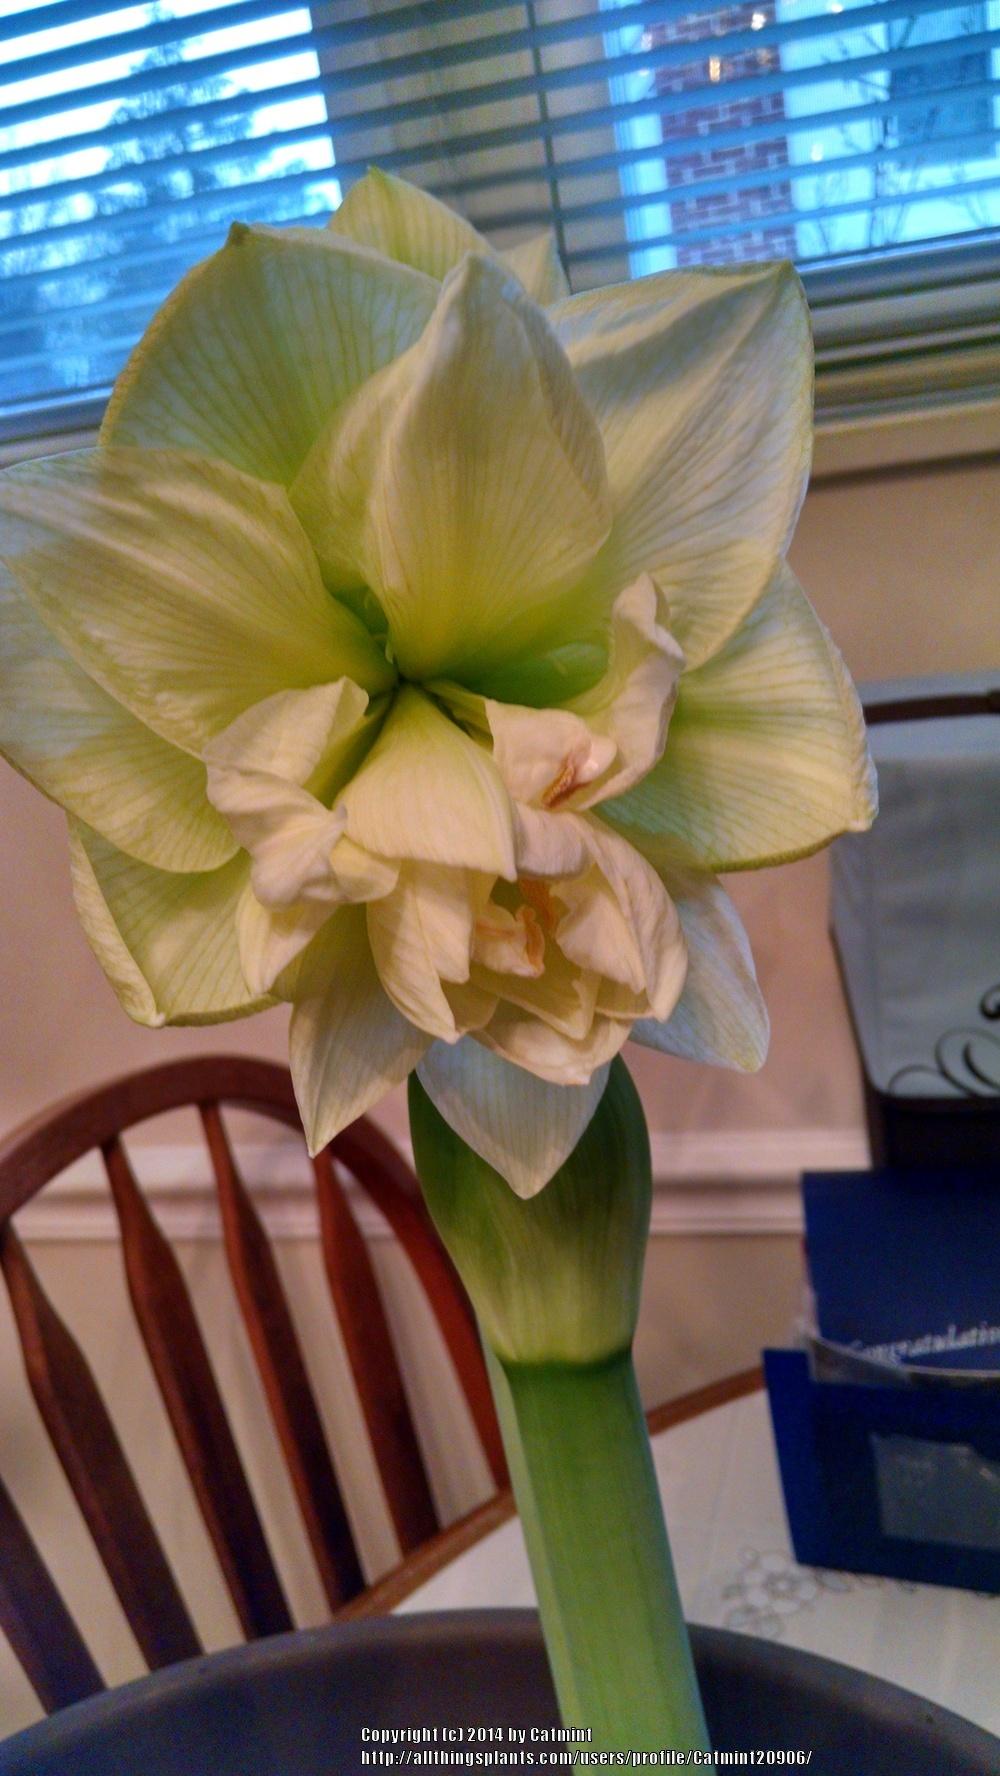 Photo of Amaryllis (Hippeastrum 'Aphrodite') uploaded by Catmint20906